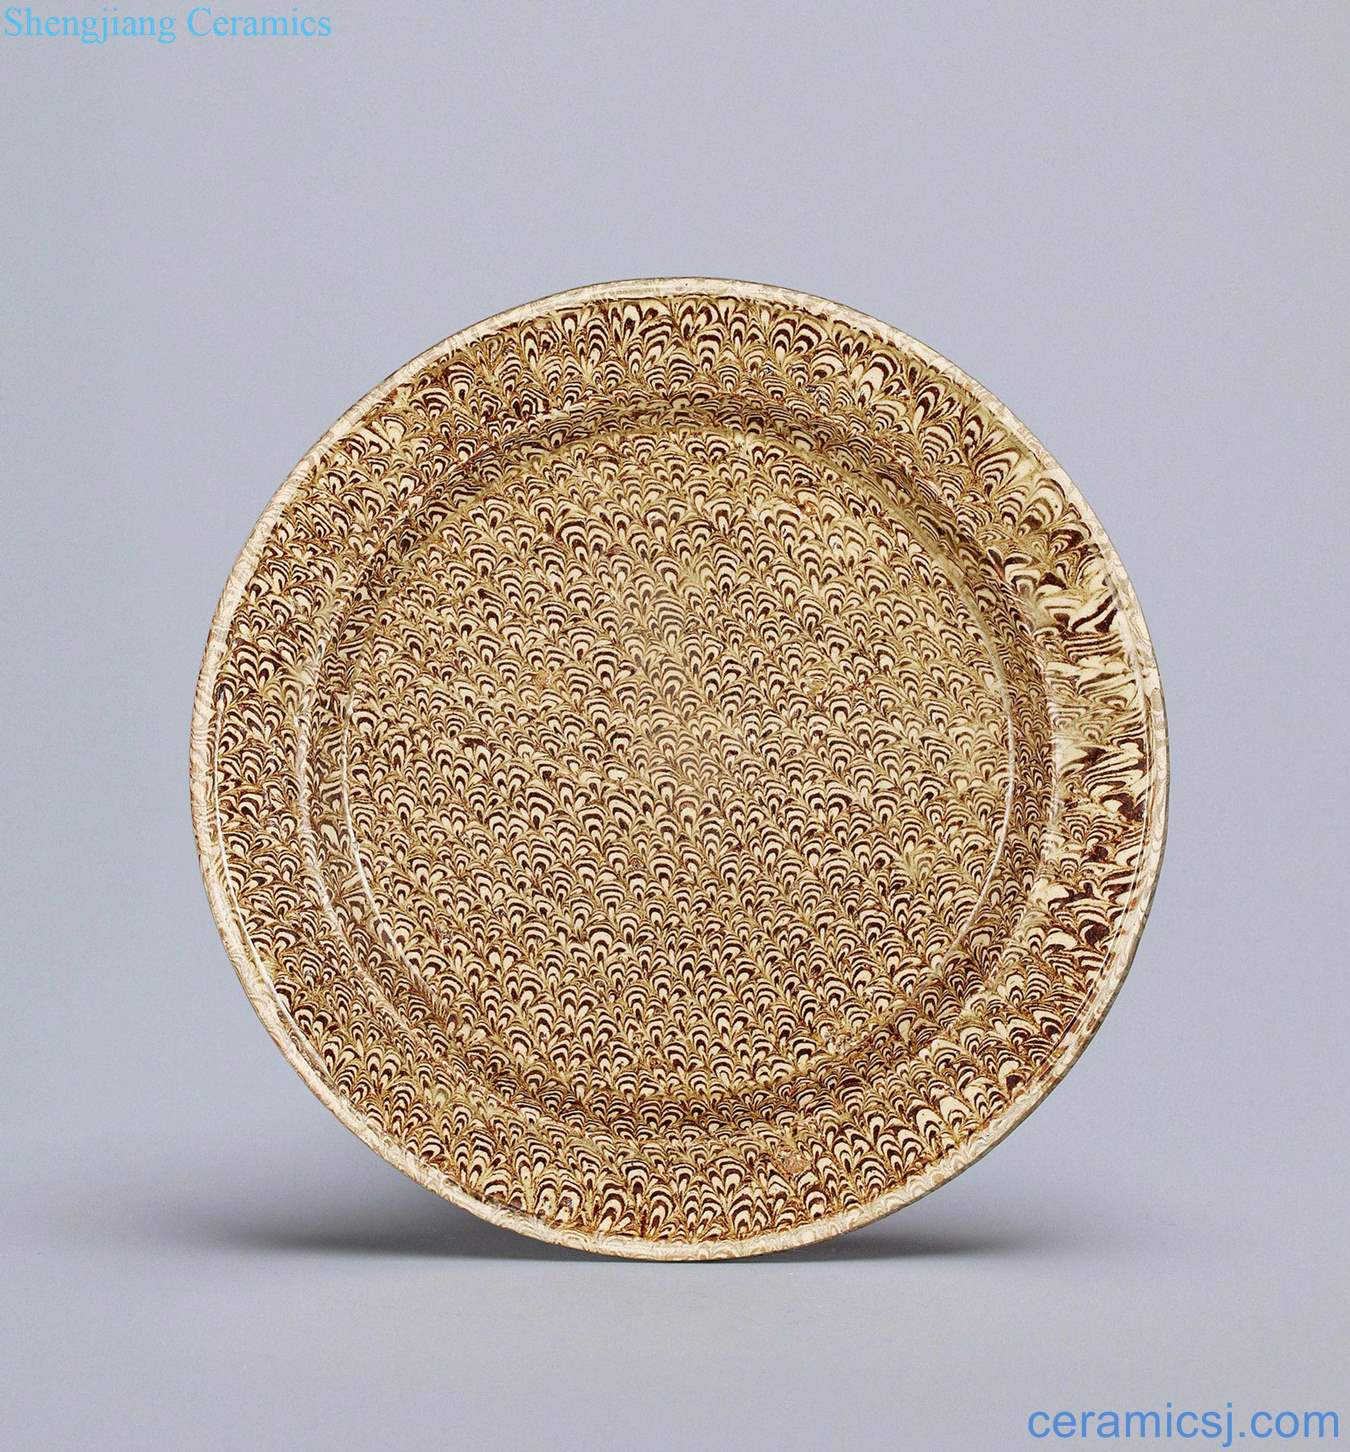 Northern song dynasty (960-1127) and gold (1115-1234) in meiyukou tangyan kiln twisted placenta feather grain fold along the plate